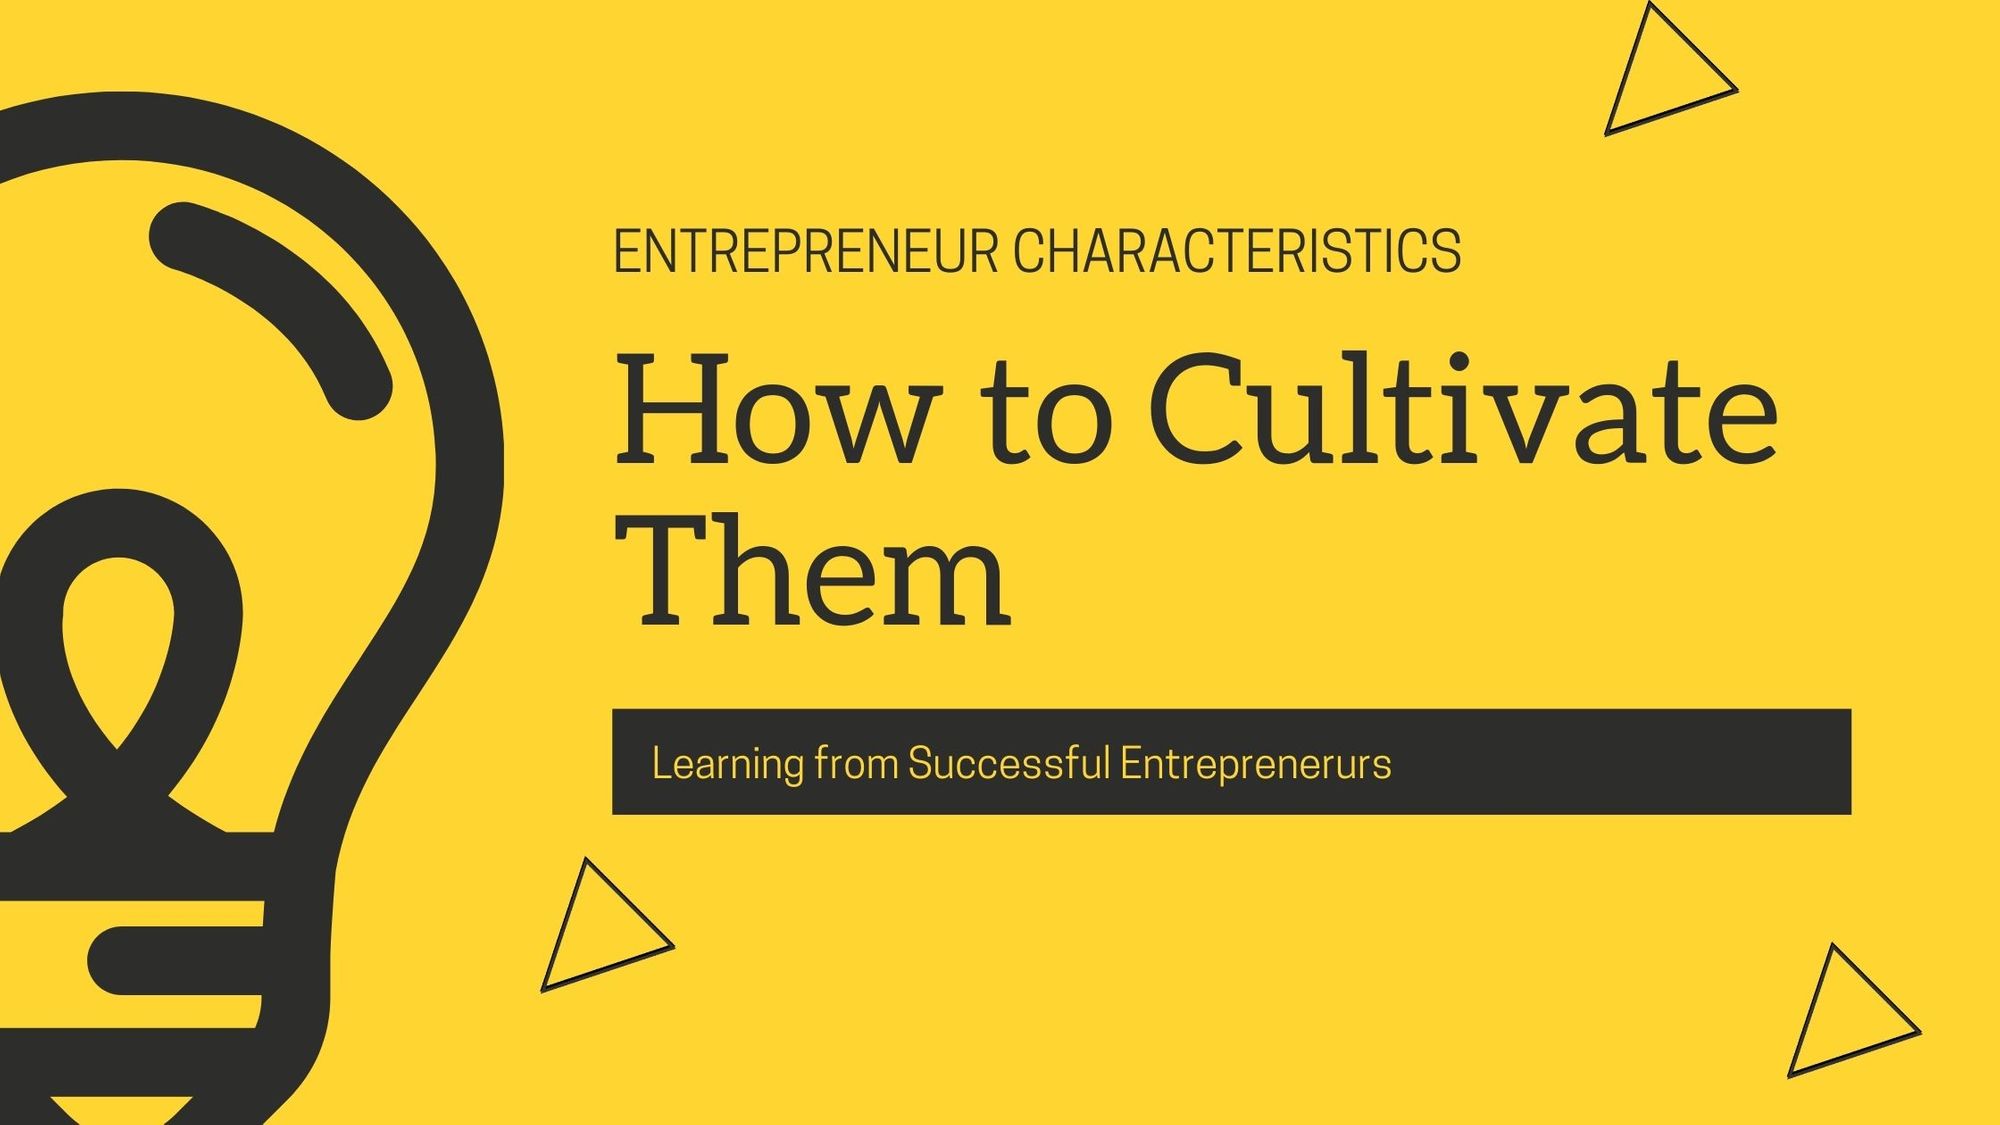 What are Important Entrepreneur Characteristics and How to Cultivate Them